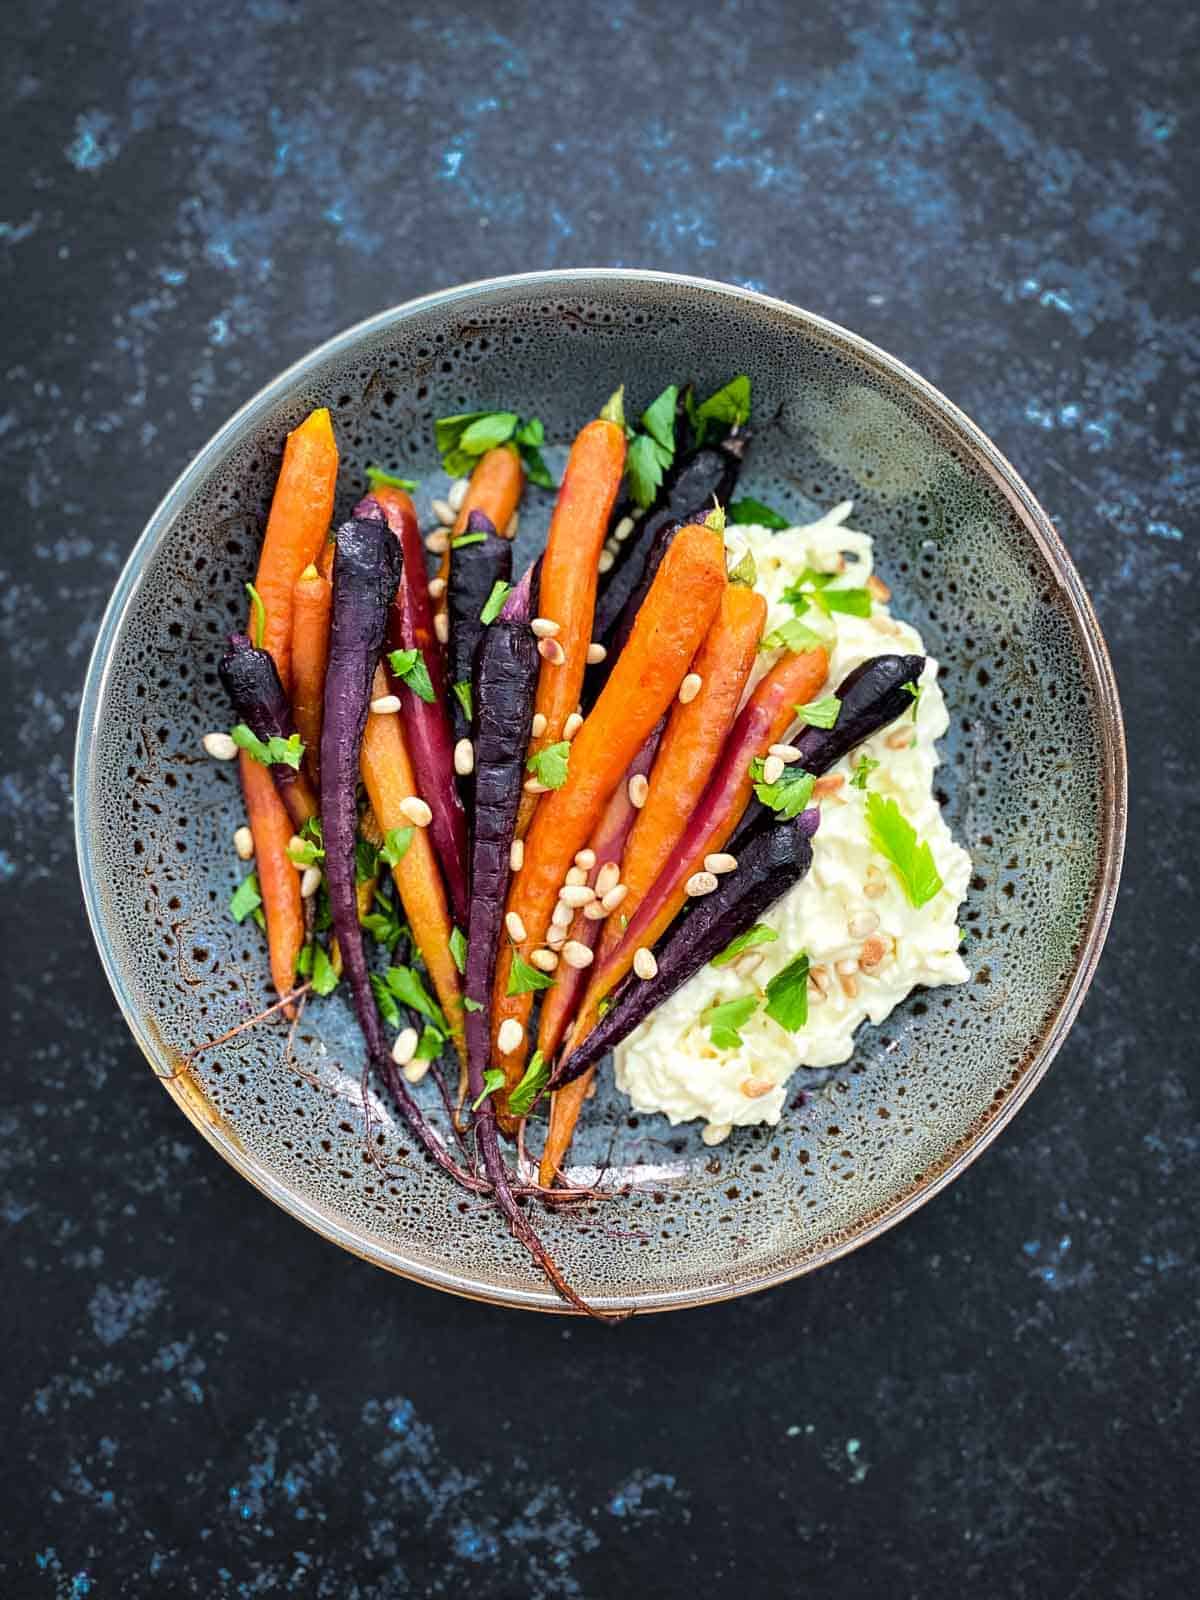 Roasted Maple Carrots with Stracciatella Cheese